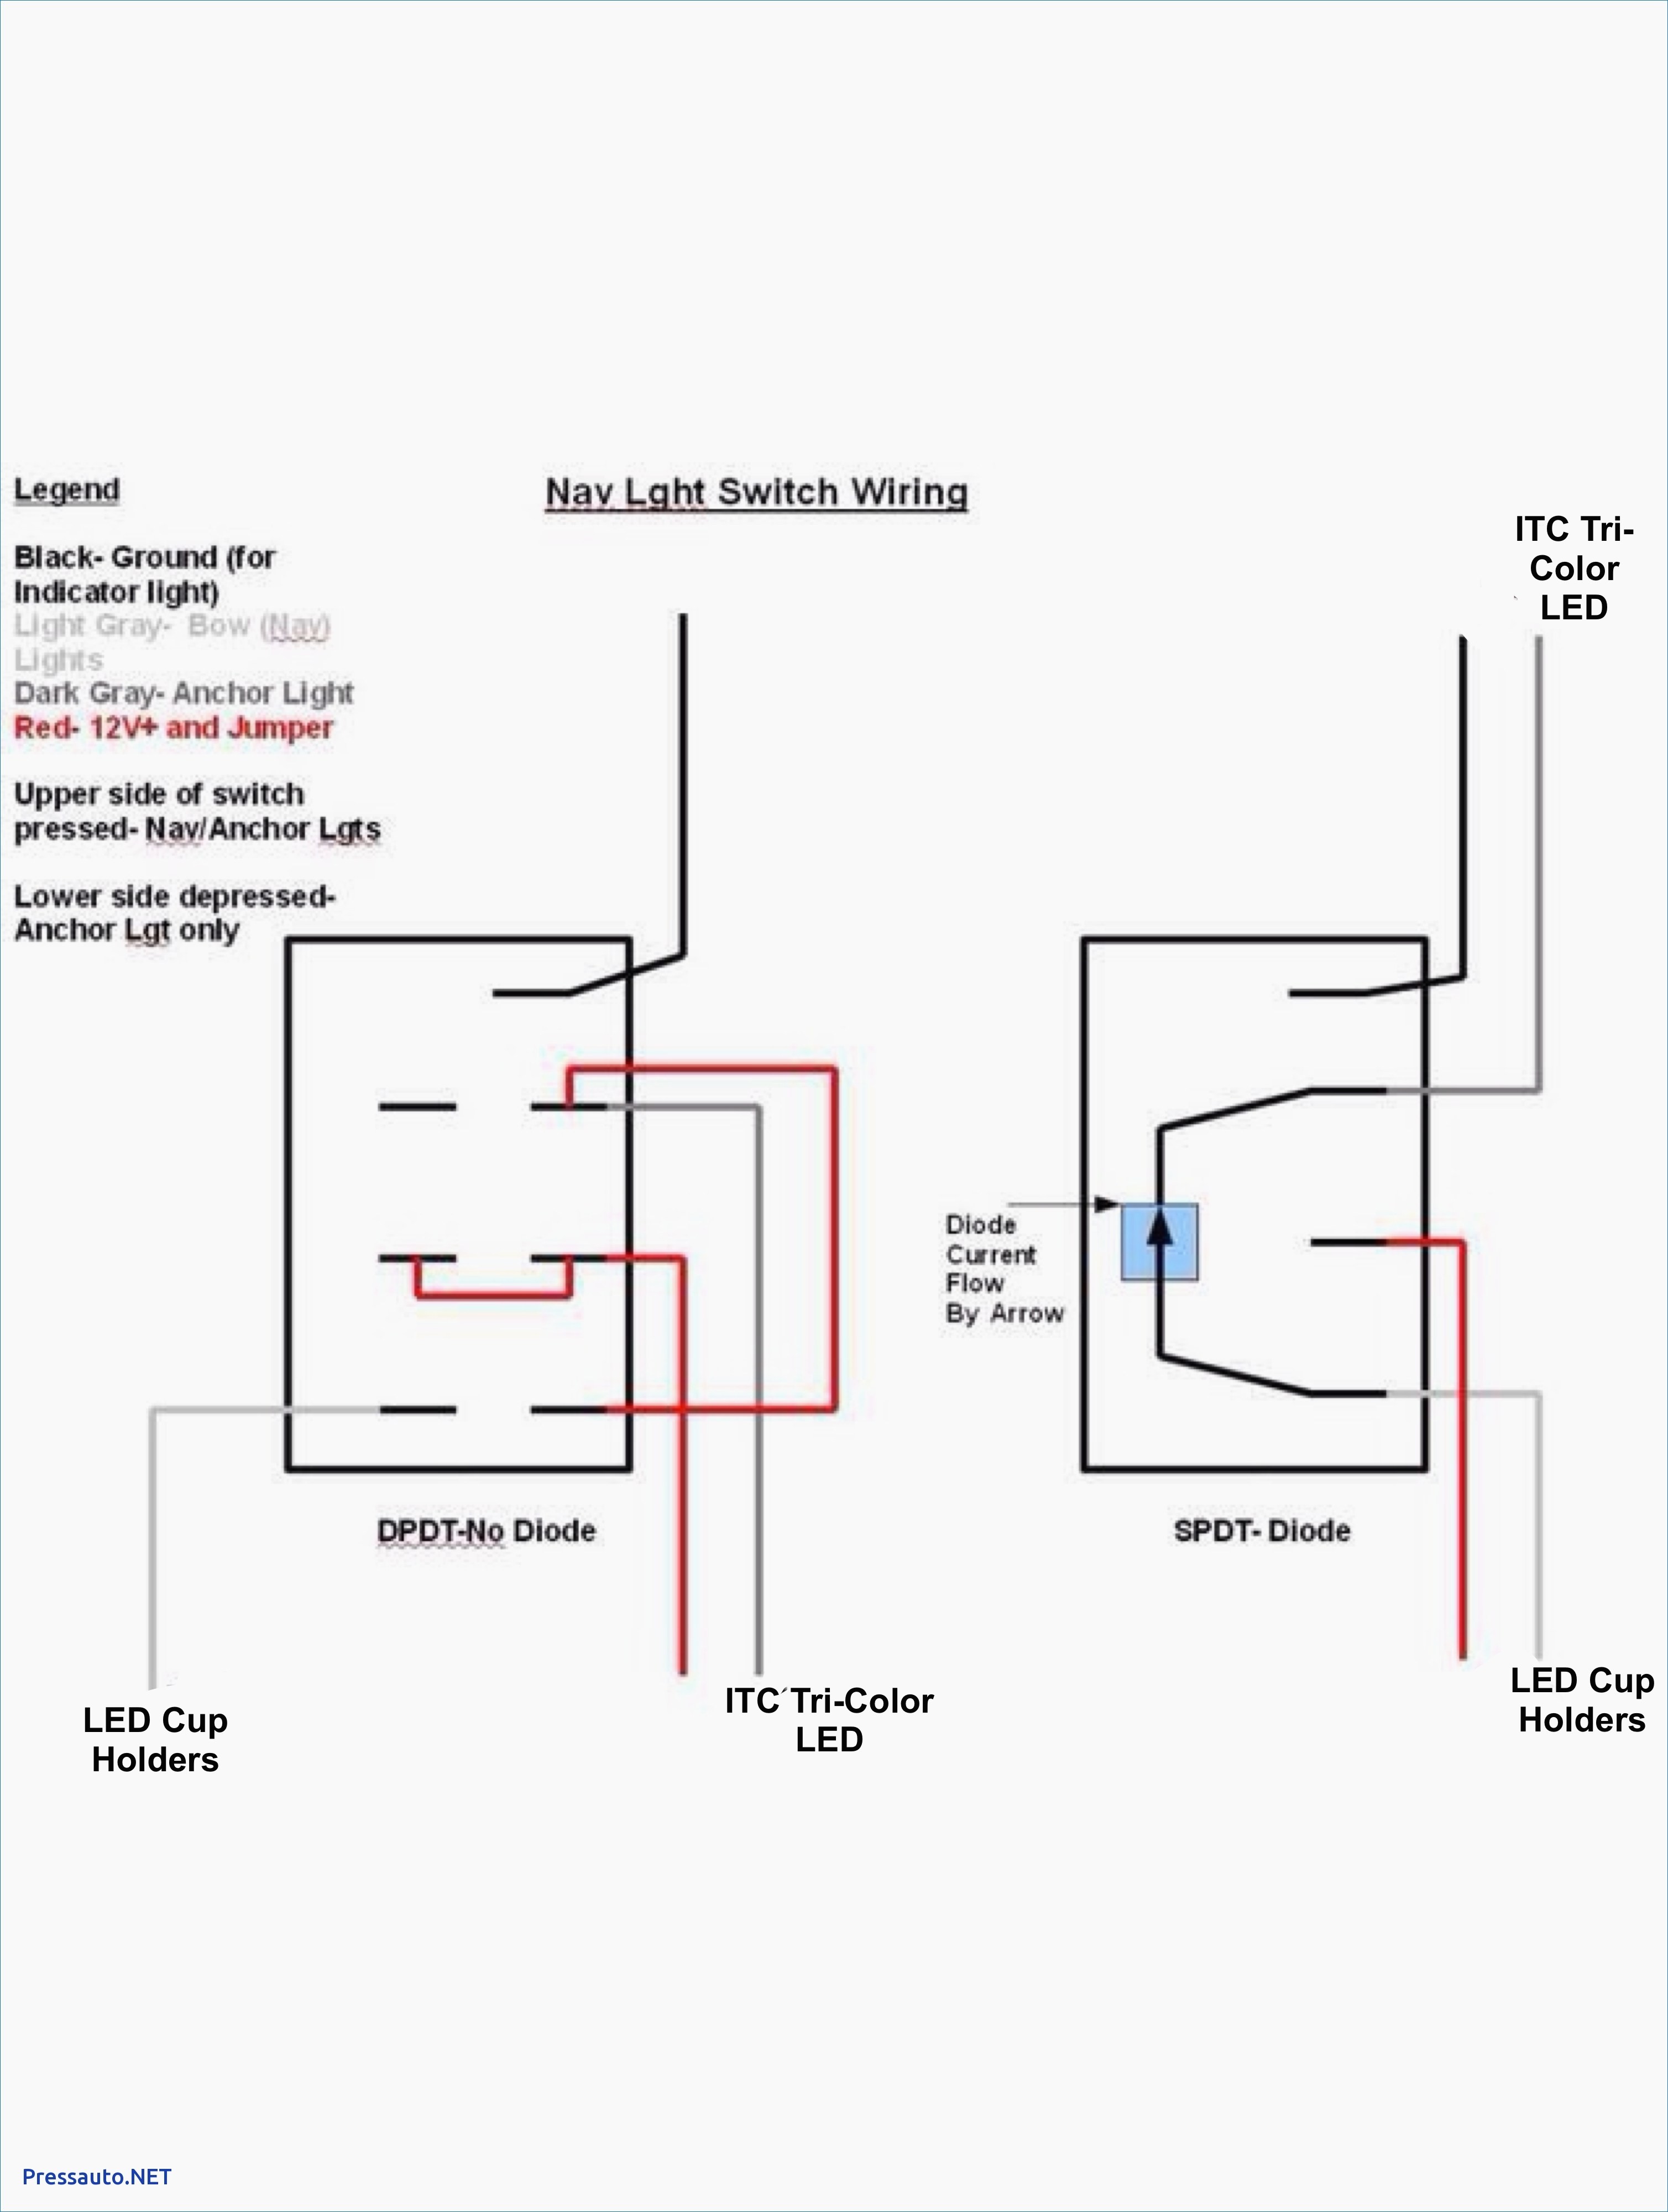 Lighted Rocker Switch Wiringiagram With Y8gln Inside Toggle Forpst Spstpdt Spst Wiring Diagram Schematic Home